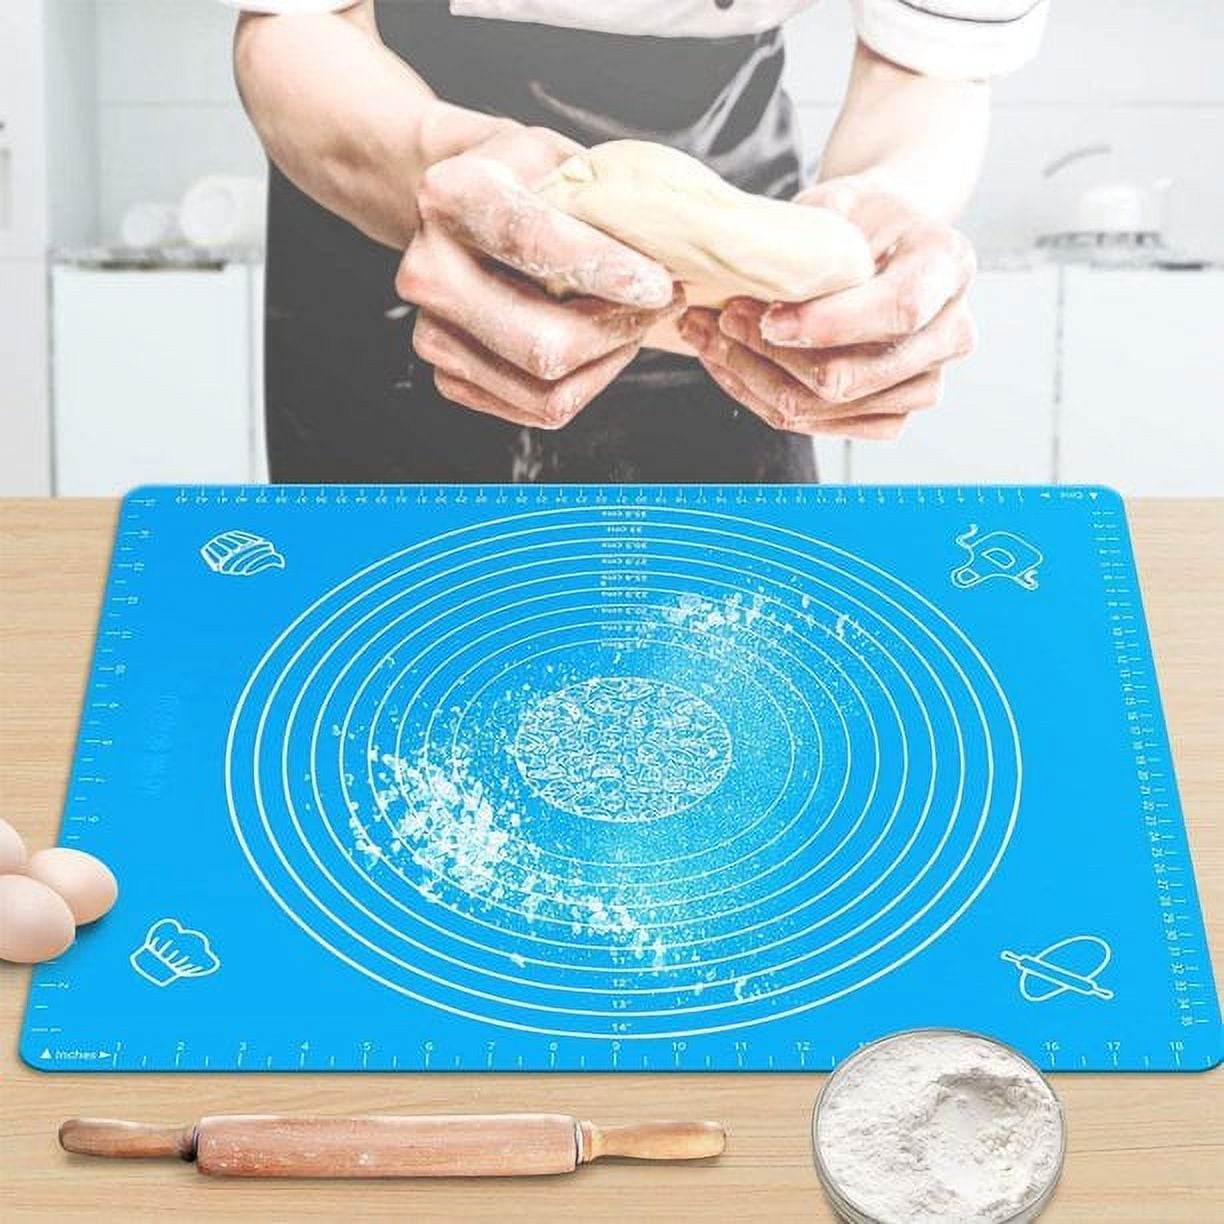 Silicone Pastry Mat - Walfos Non-Stick Baking Mat Fondant Mat with  Measurement, Non-Slip Rolling Mat, Perfect for Rolling Dough, Cookie &  Baking 15.7